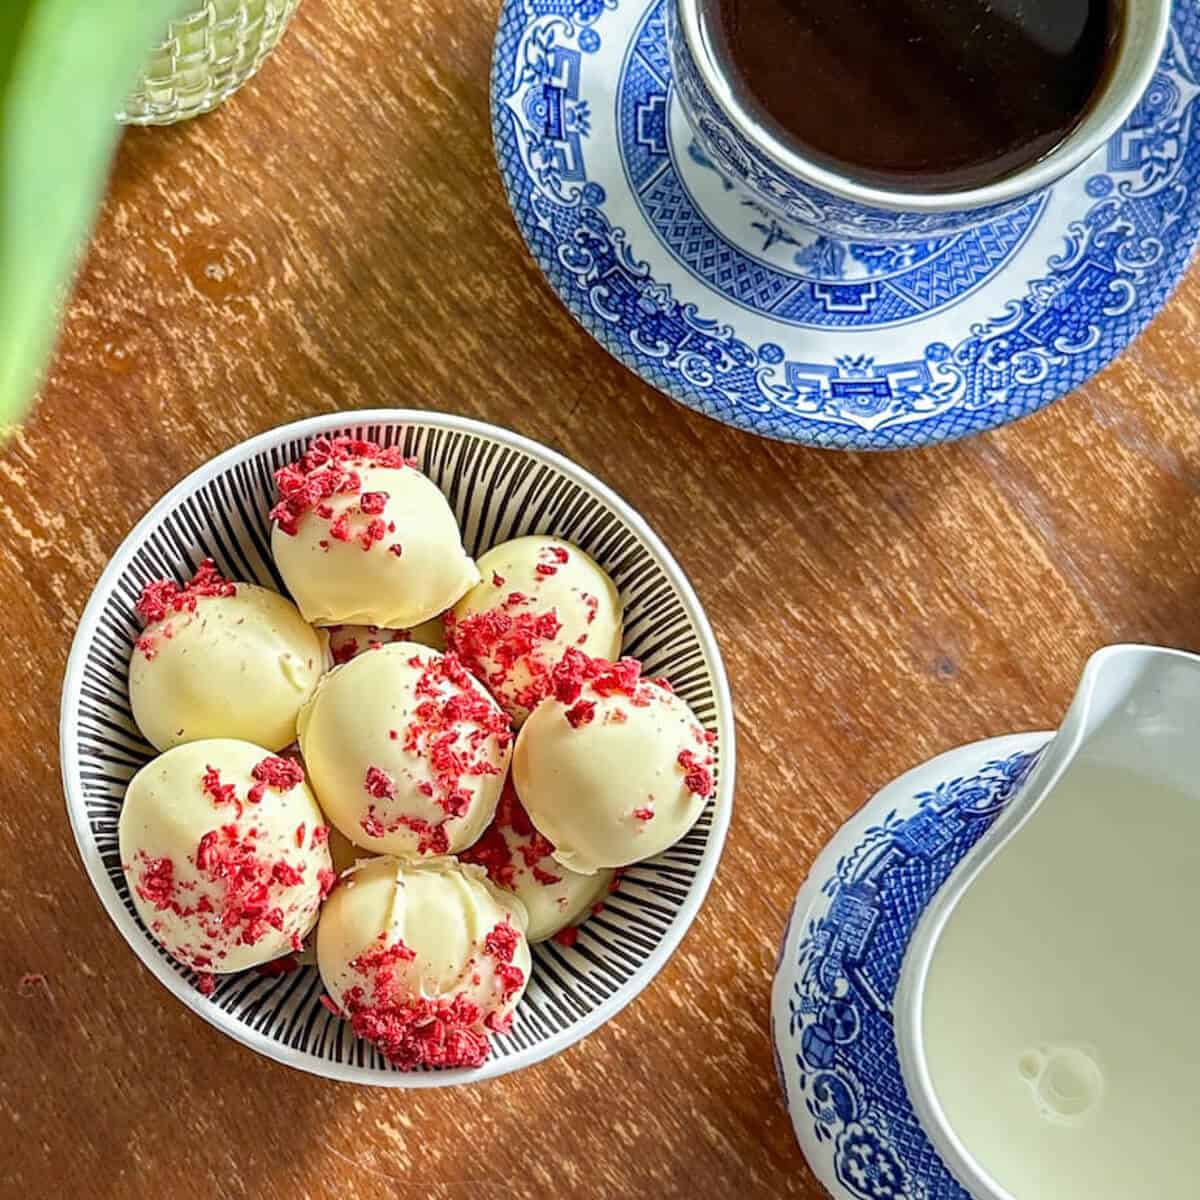 Easy Chambord Chocolate Truffles in a bowl next to a cup of coffee and jug of milk.